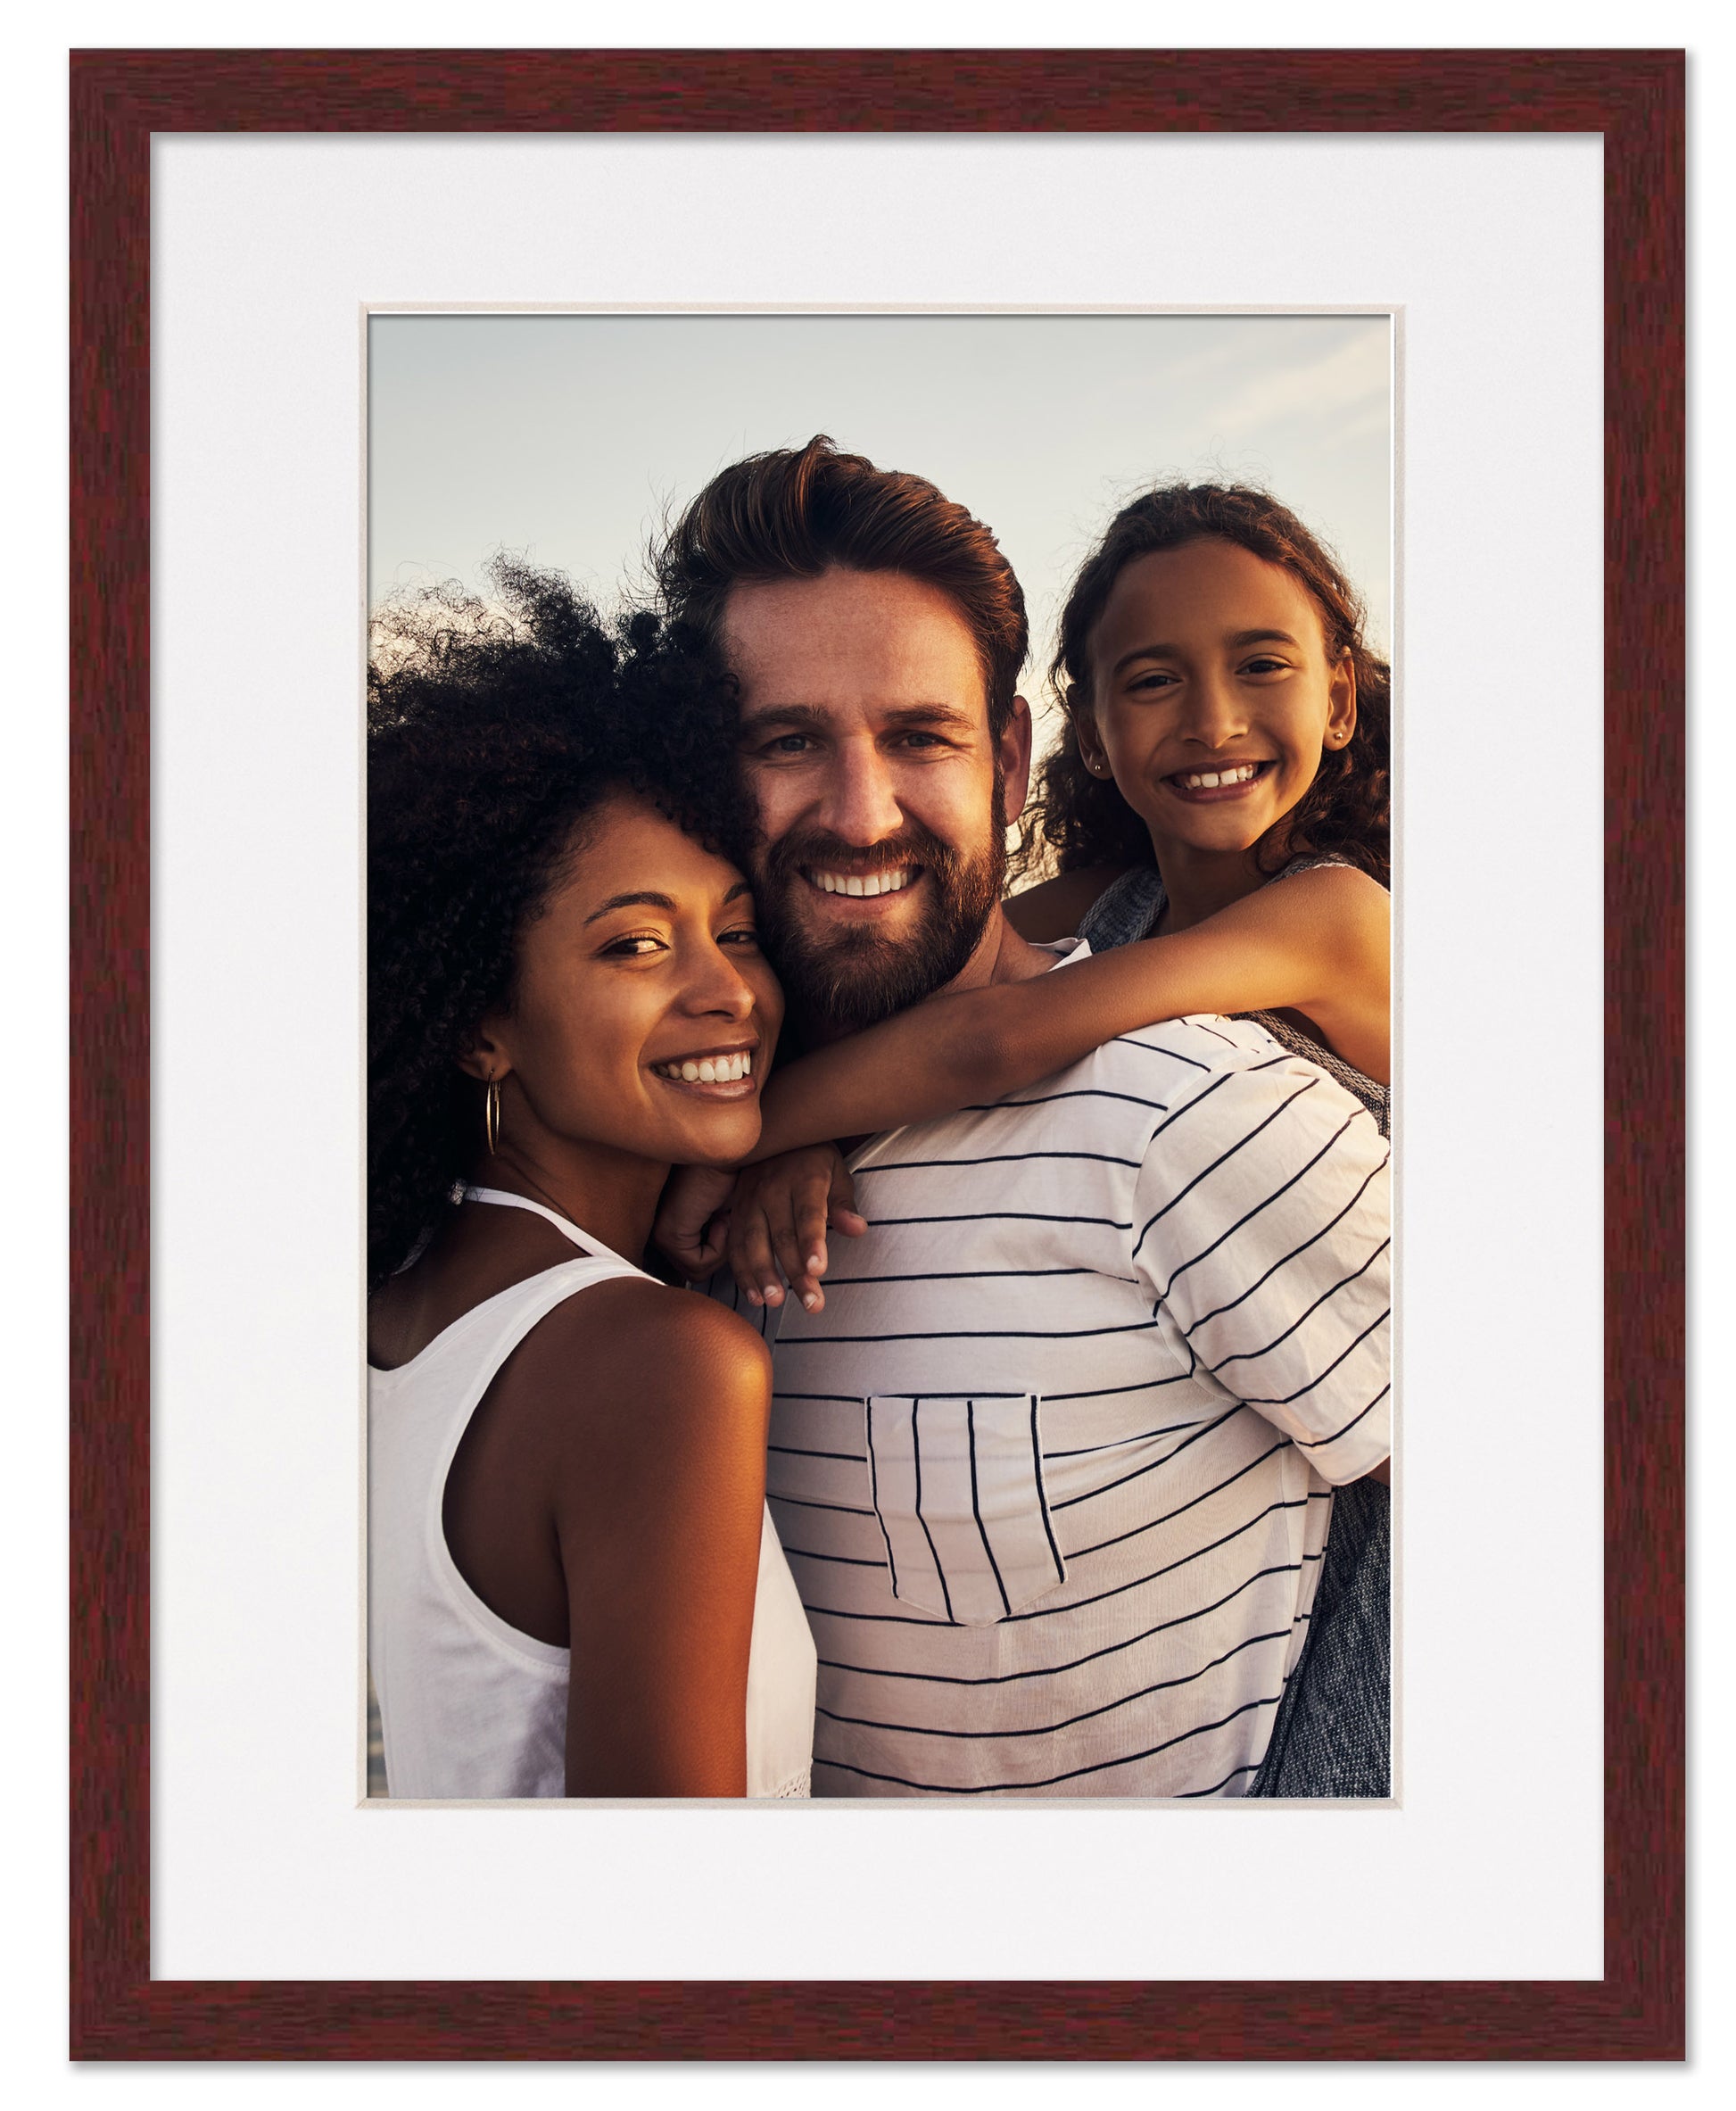 9-Pack, white, 8x8 Photo Frame (4x4 Matted)